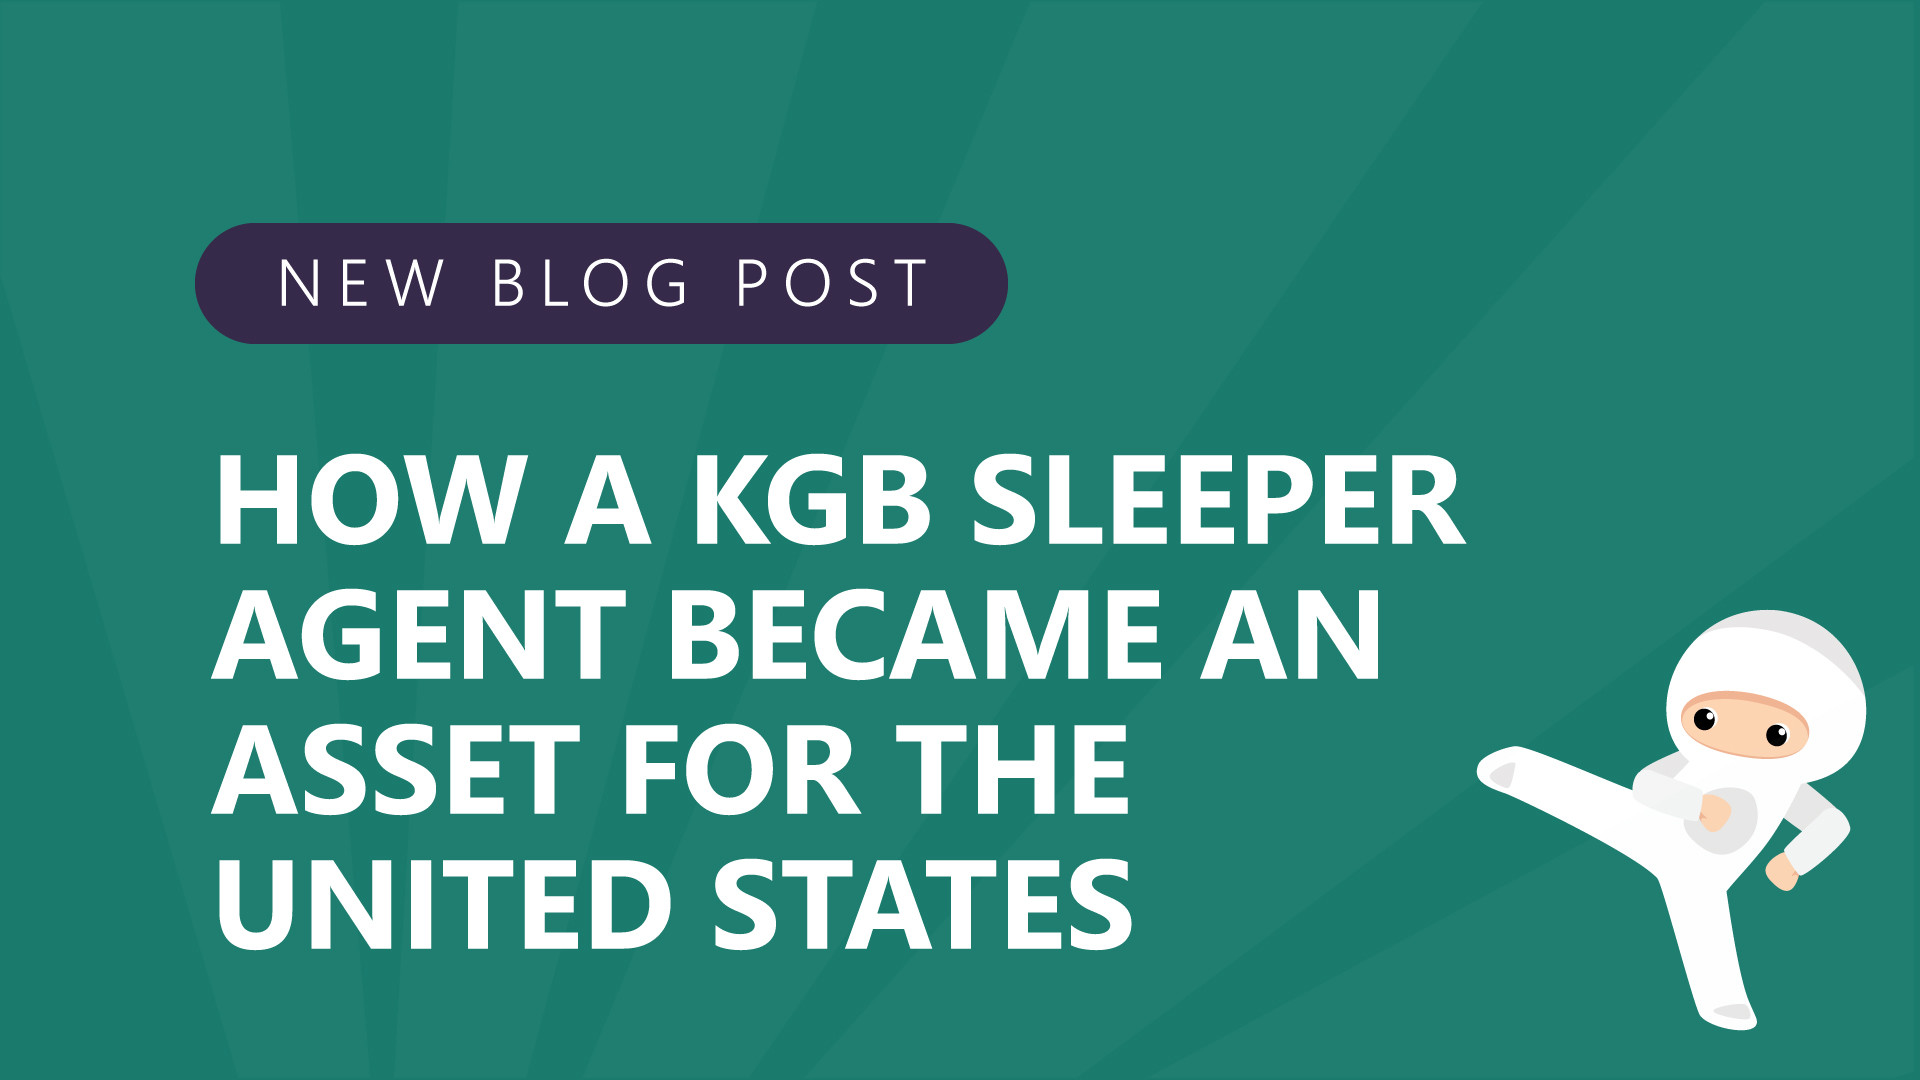 How-a-KGB-Sleeper-Agent-became-an-Asset-for-the-United-States-1-1.jpg